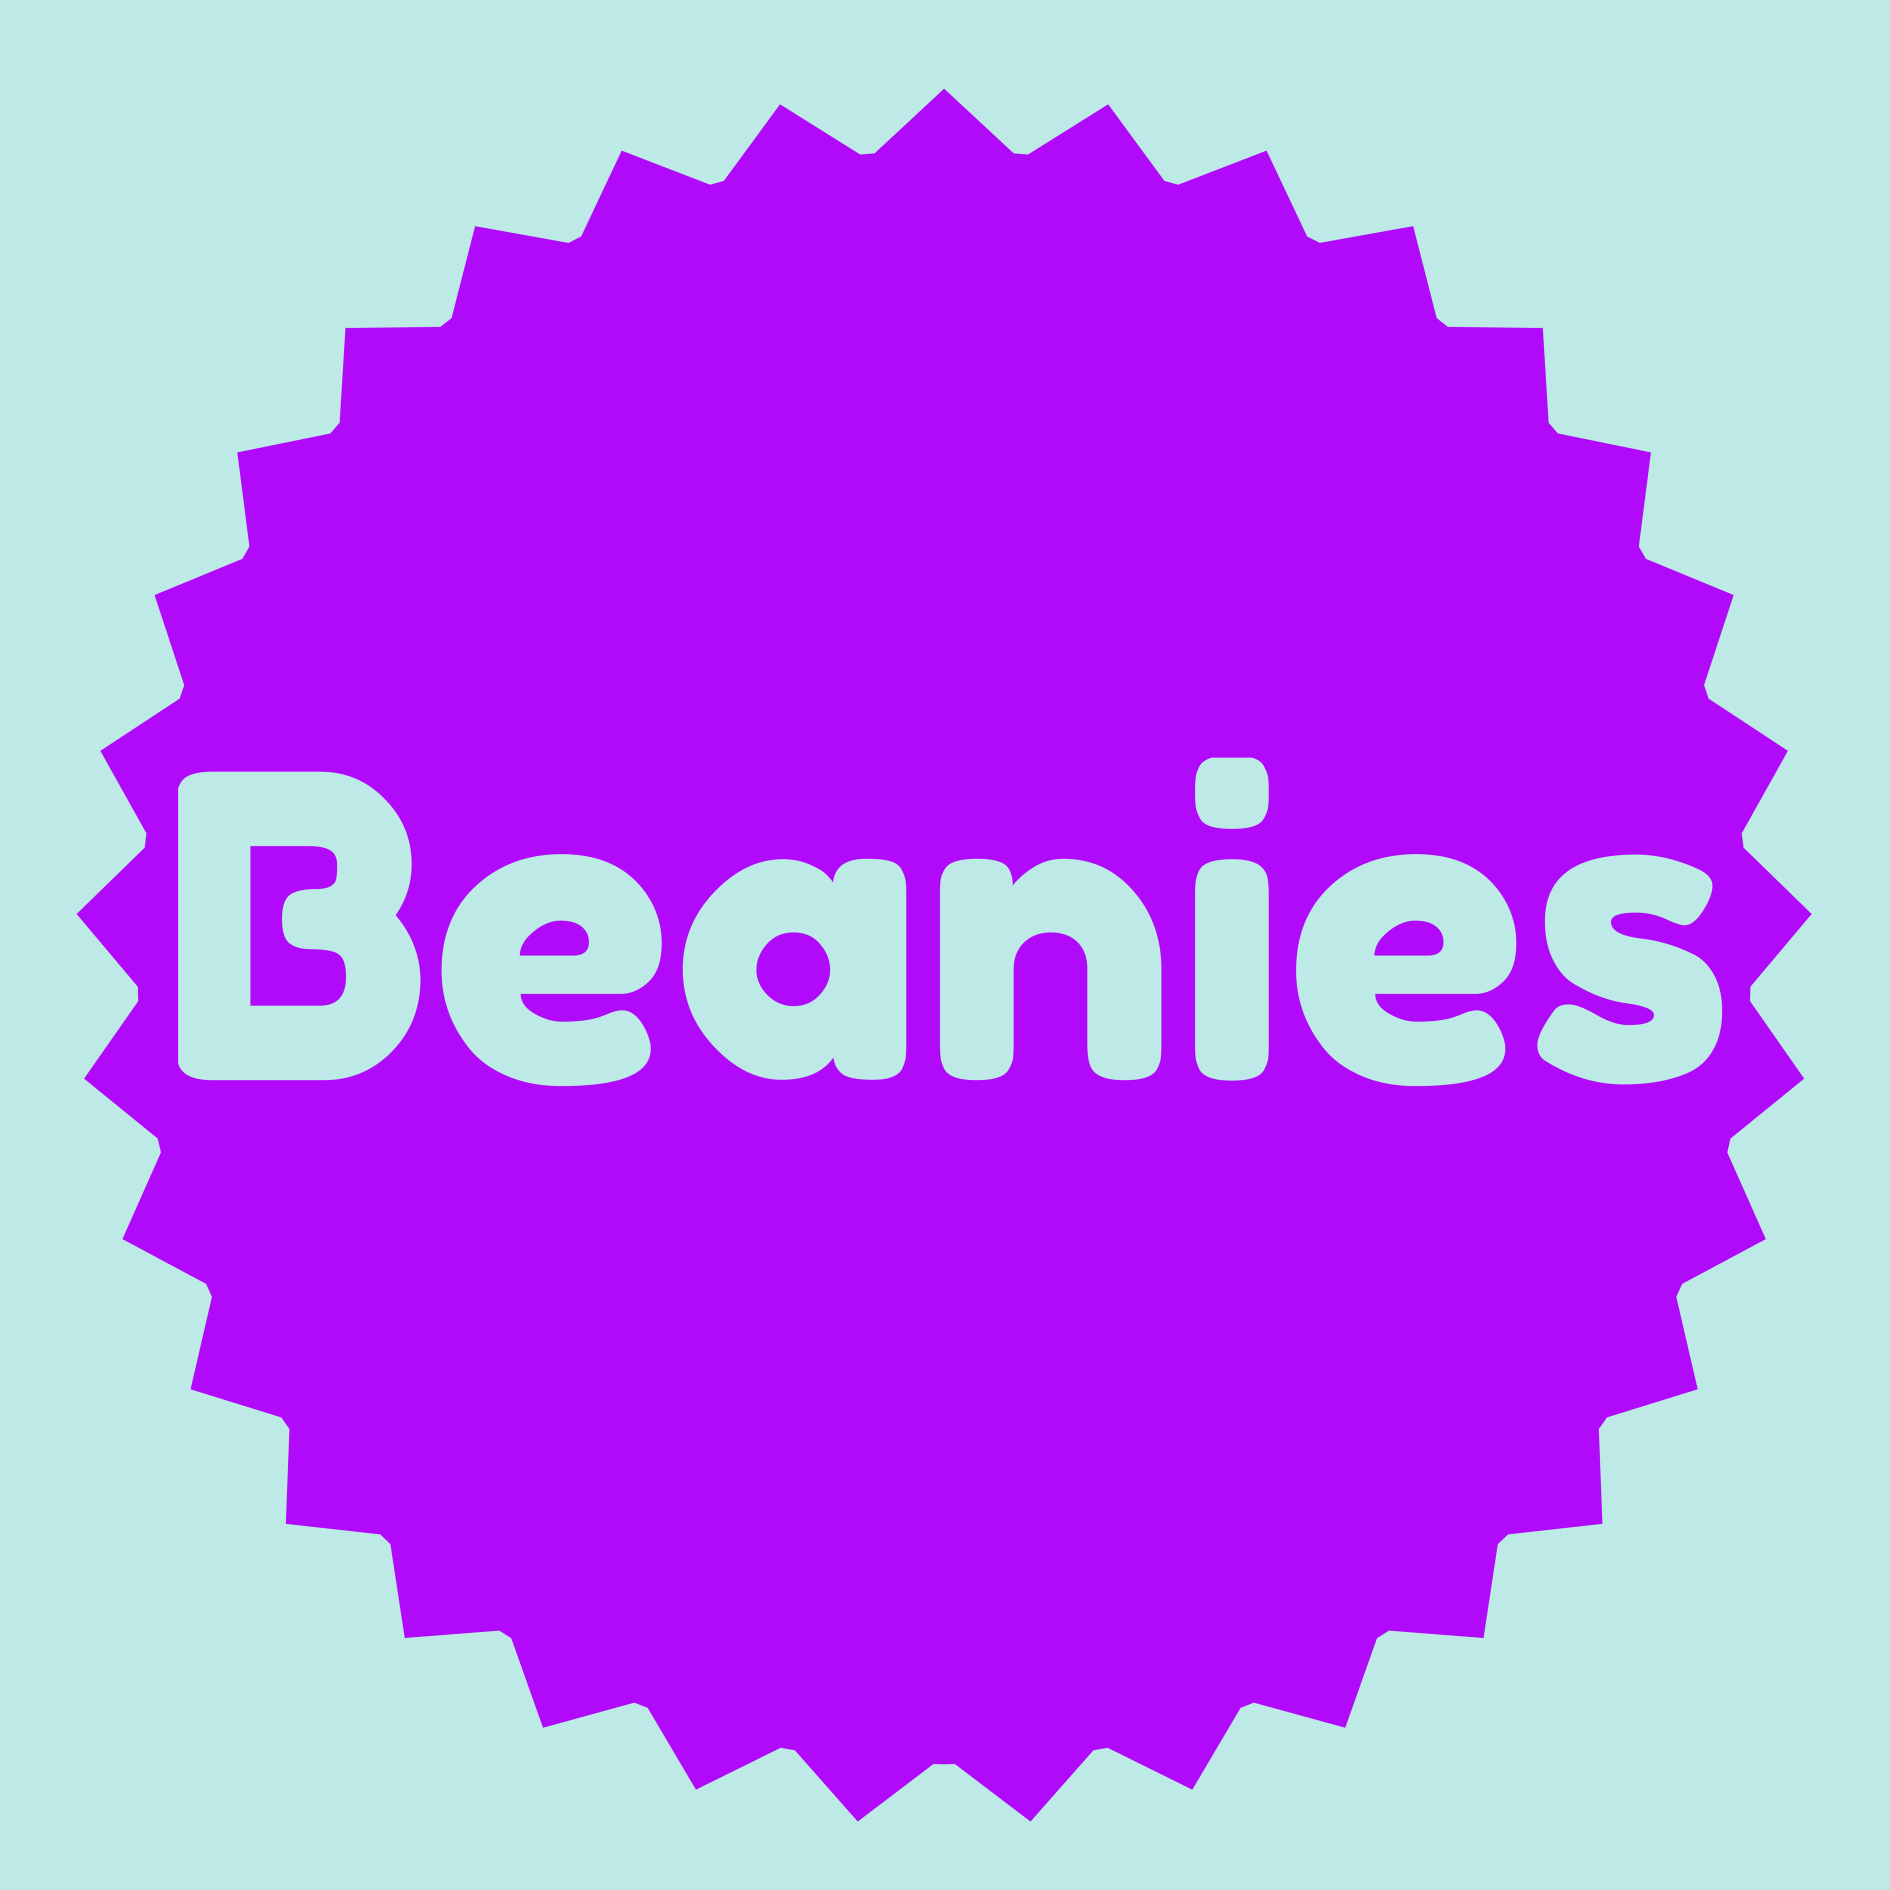 Beanies is a child-friendly café and play area